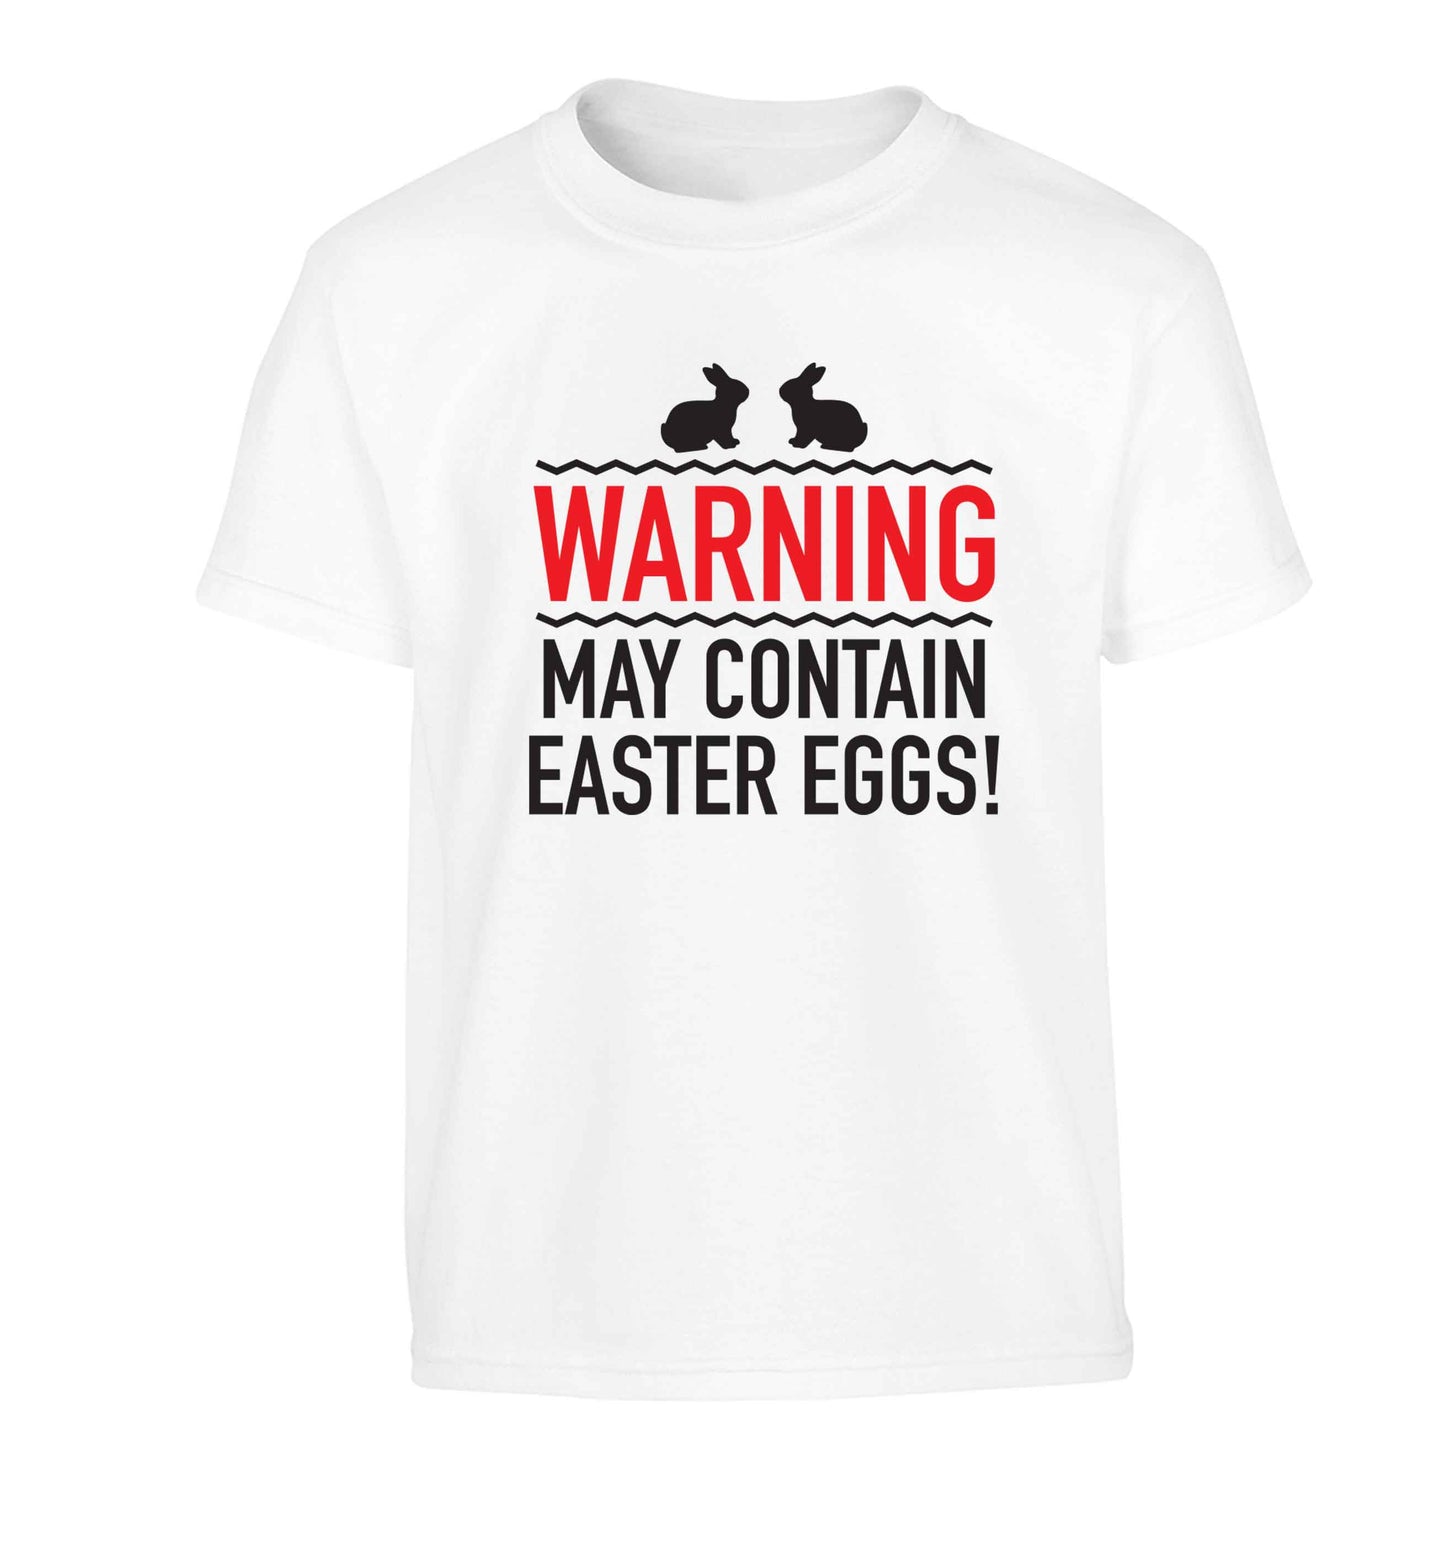 Warning may contain Easter eggs Children's white Tshirt 12-13 Years